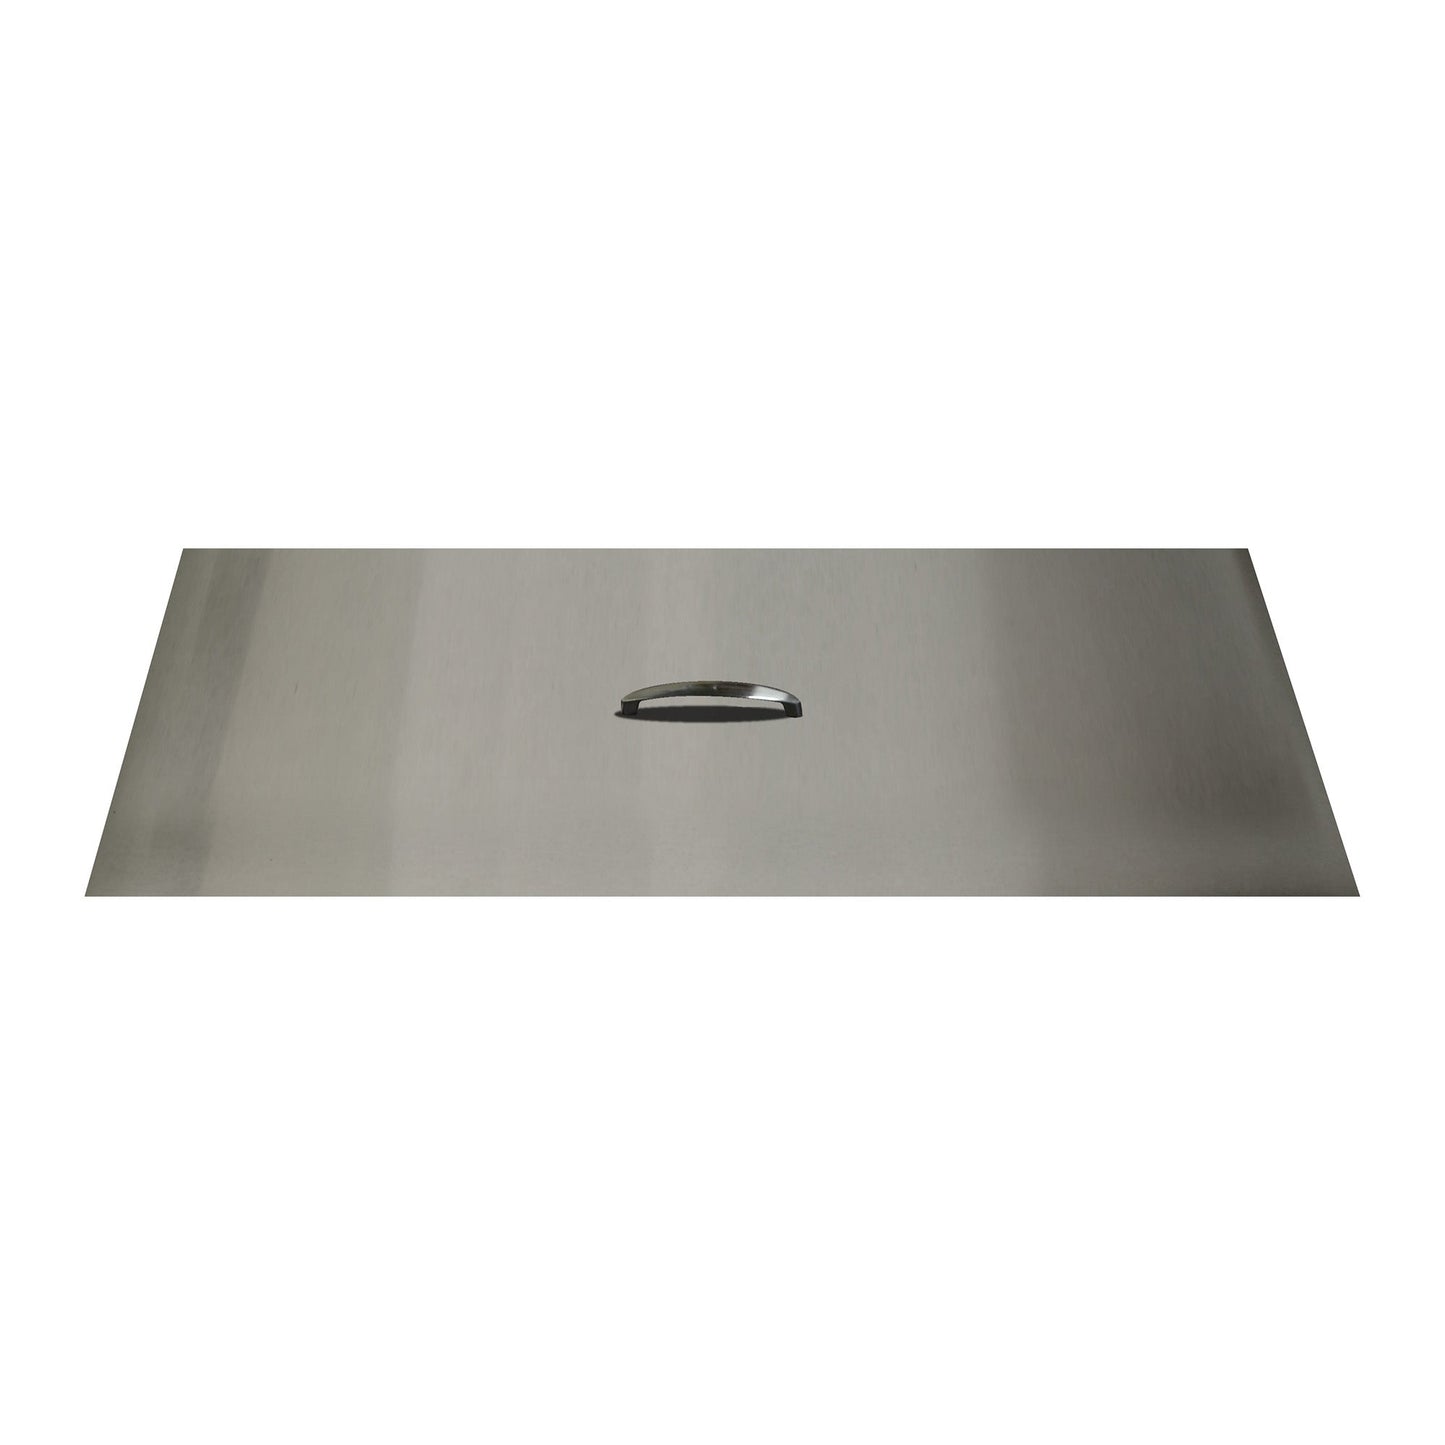 The Outdoor Plus 10" x 28" Stainless Steel Rectangular Fire Pit Lid Cover